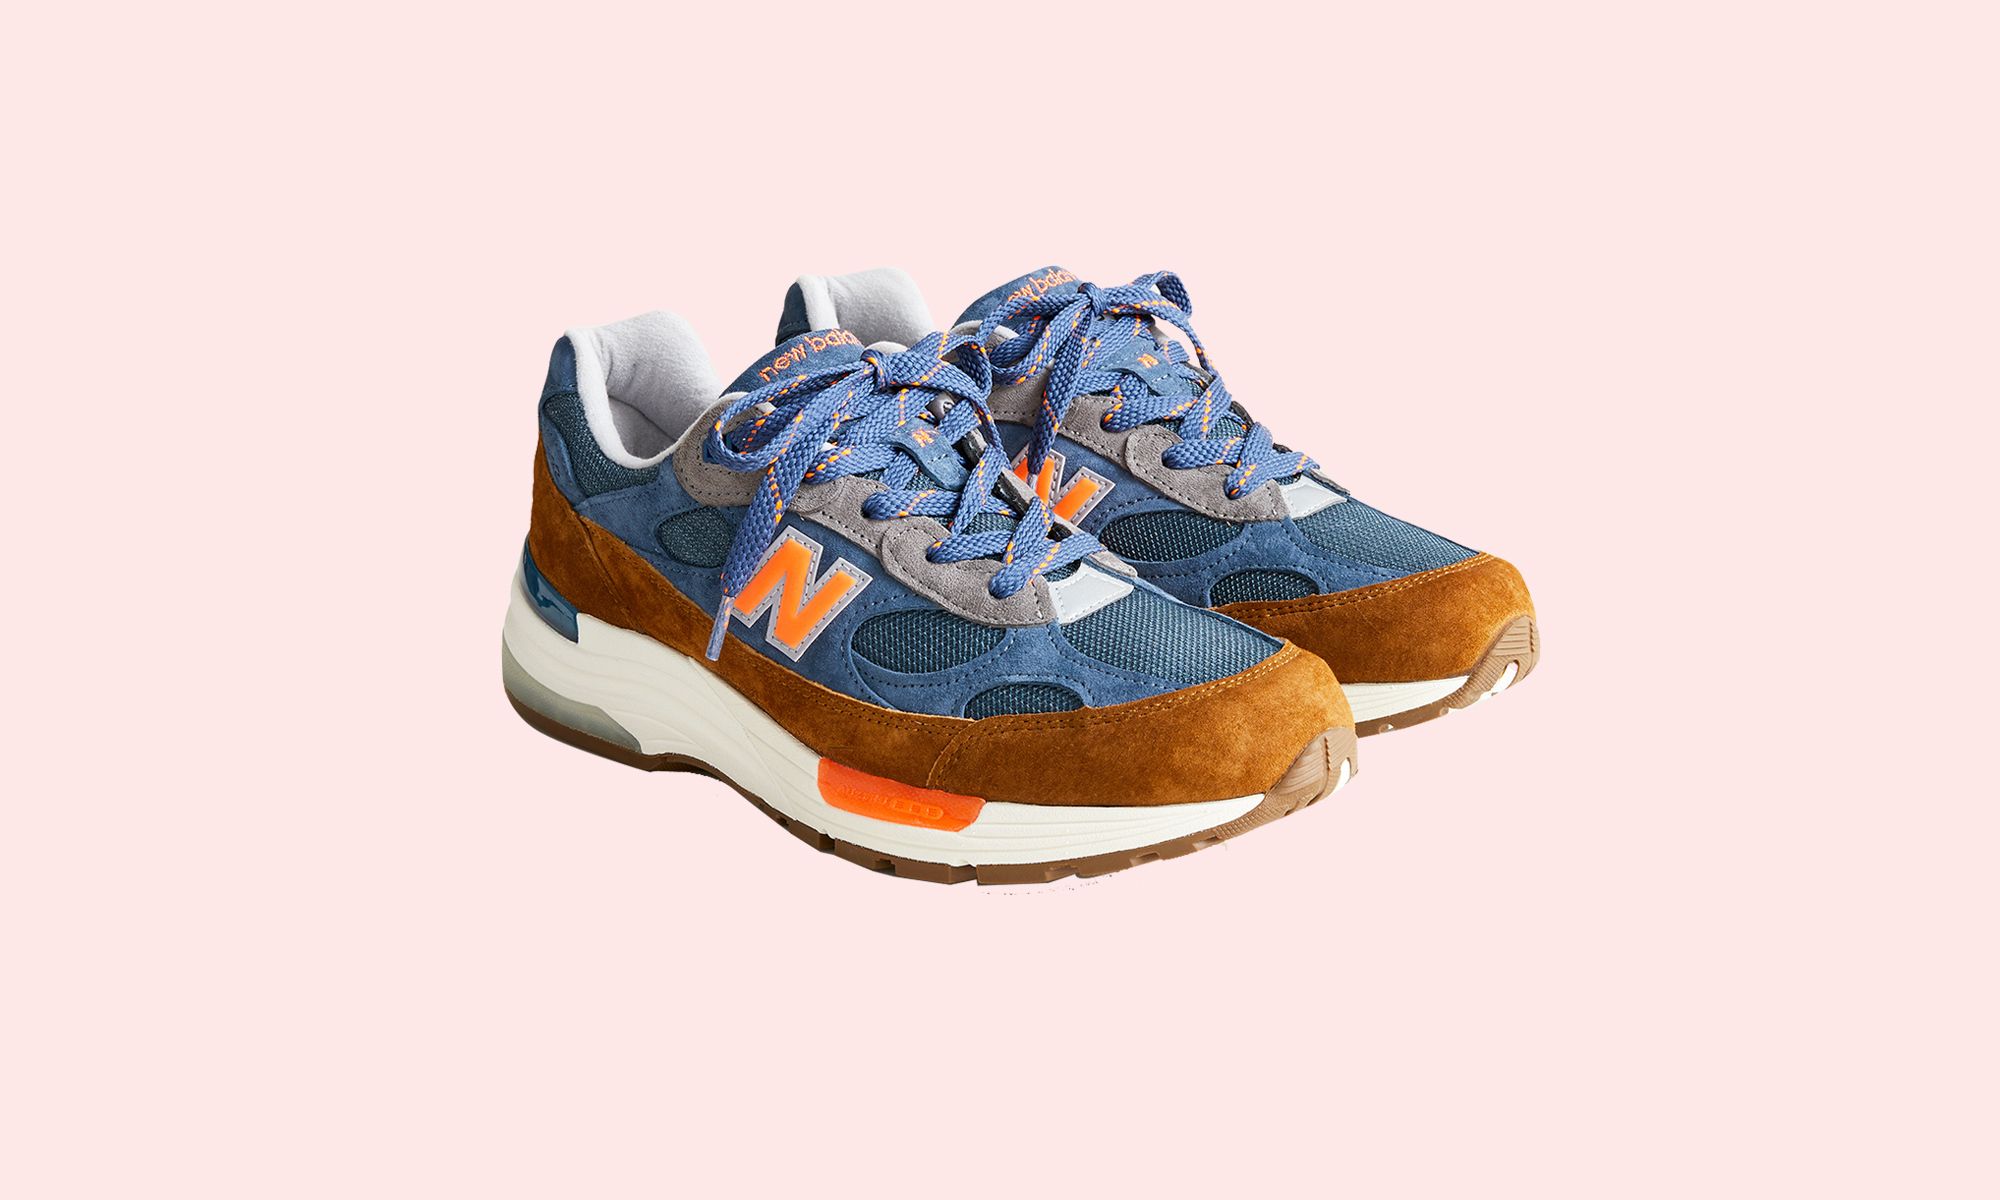 New Balance x J.Crew 992 'NY' New York Sneakers Release Date ...